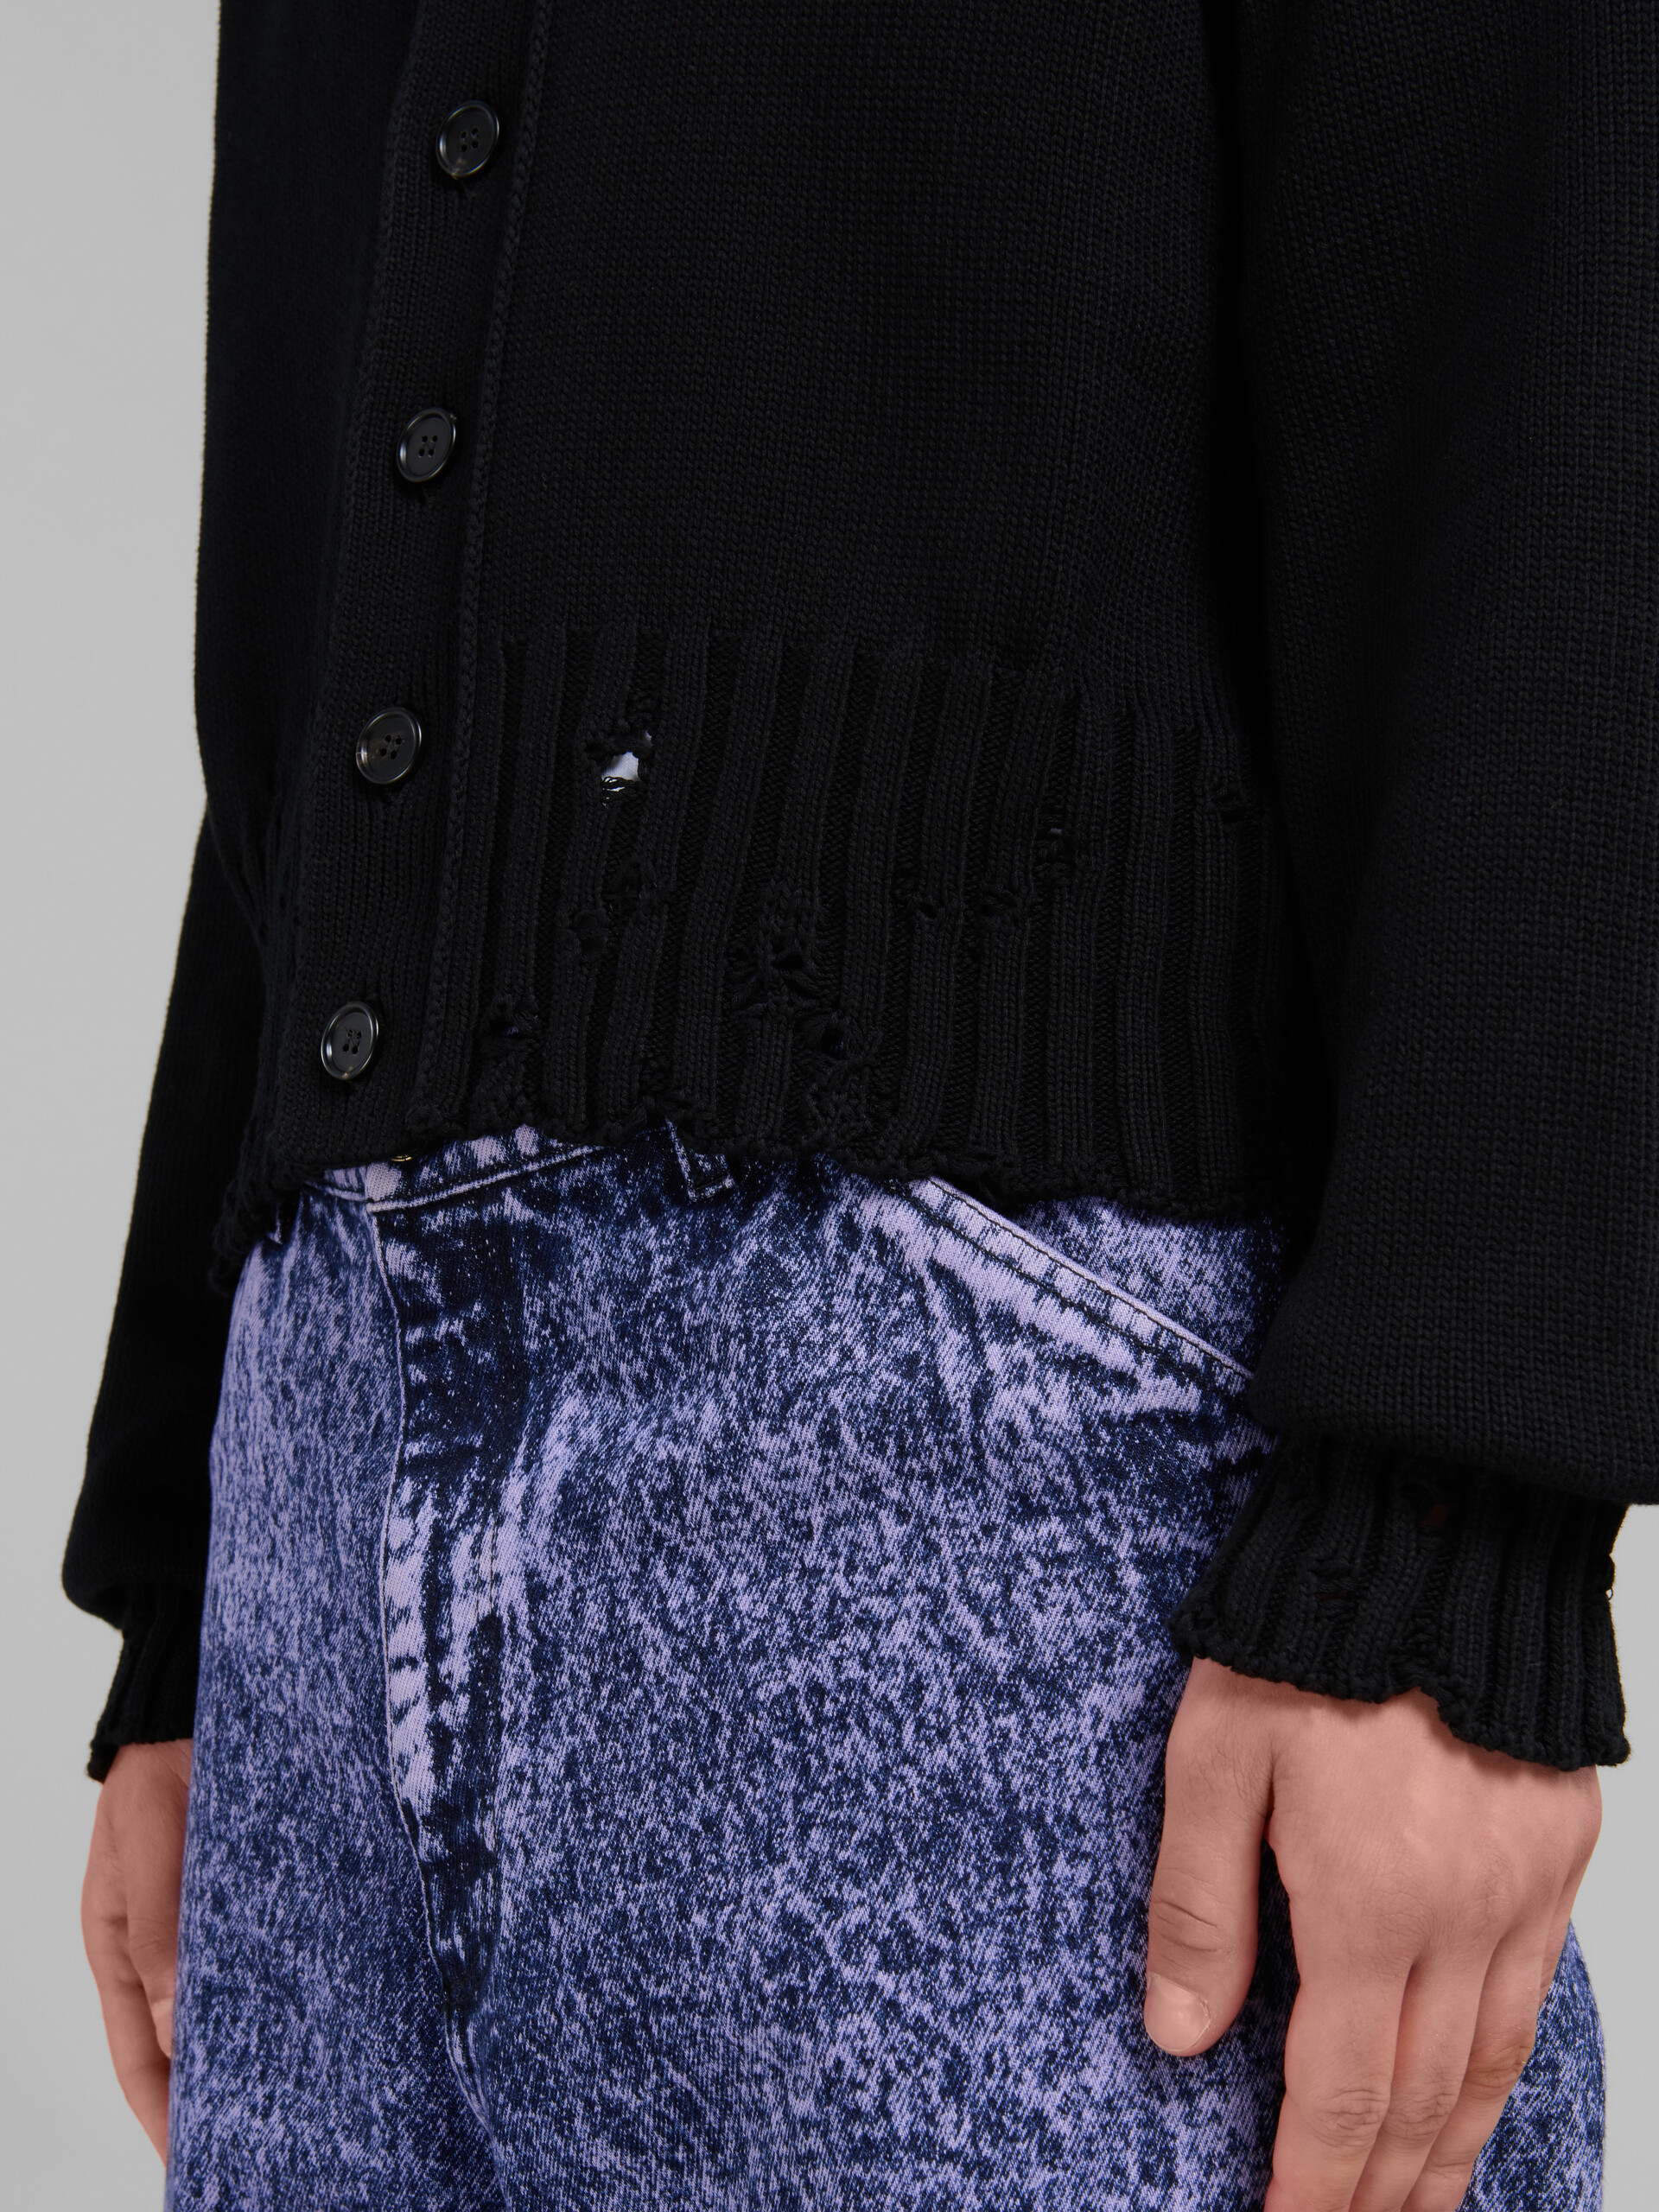 Black dishevelled cotton cardigan - Pullovers - Image 5